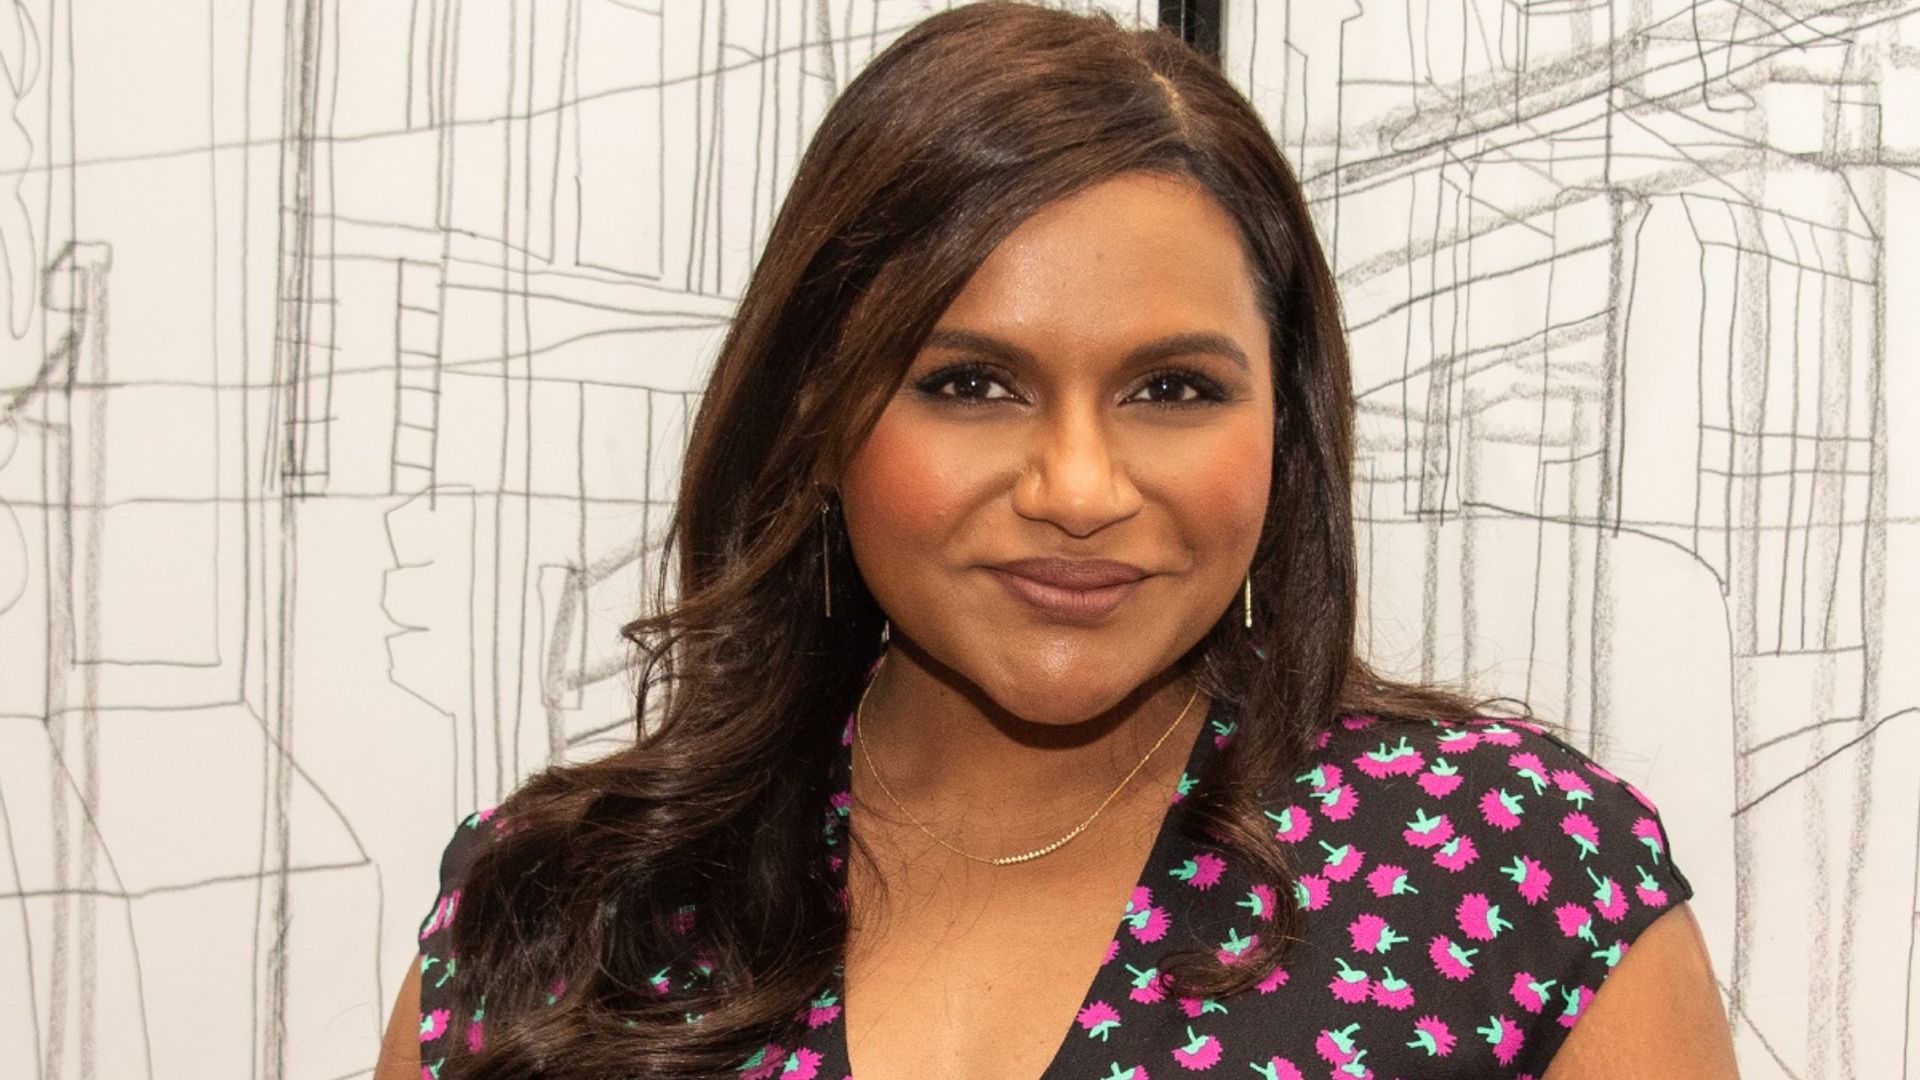 Mindy Kaling pays emotional tribute to Kobe Bryant with rare picture of daughter Katherine